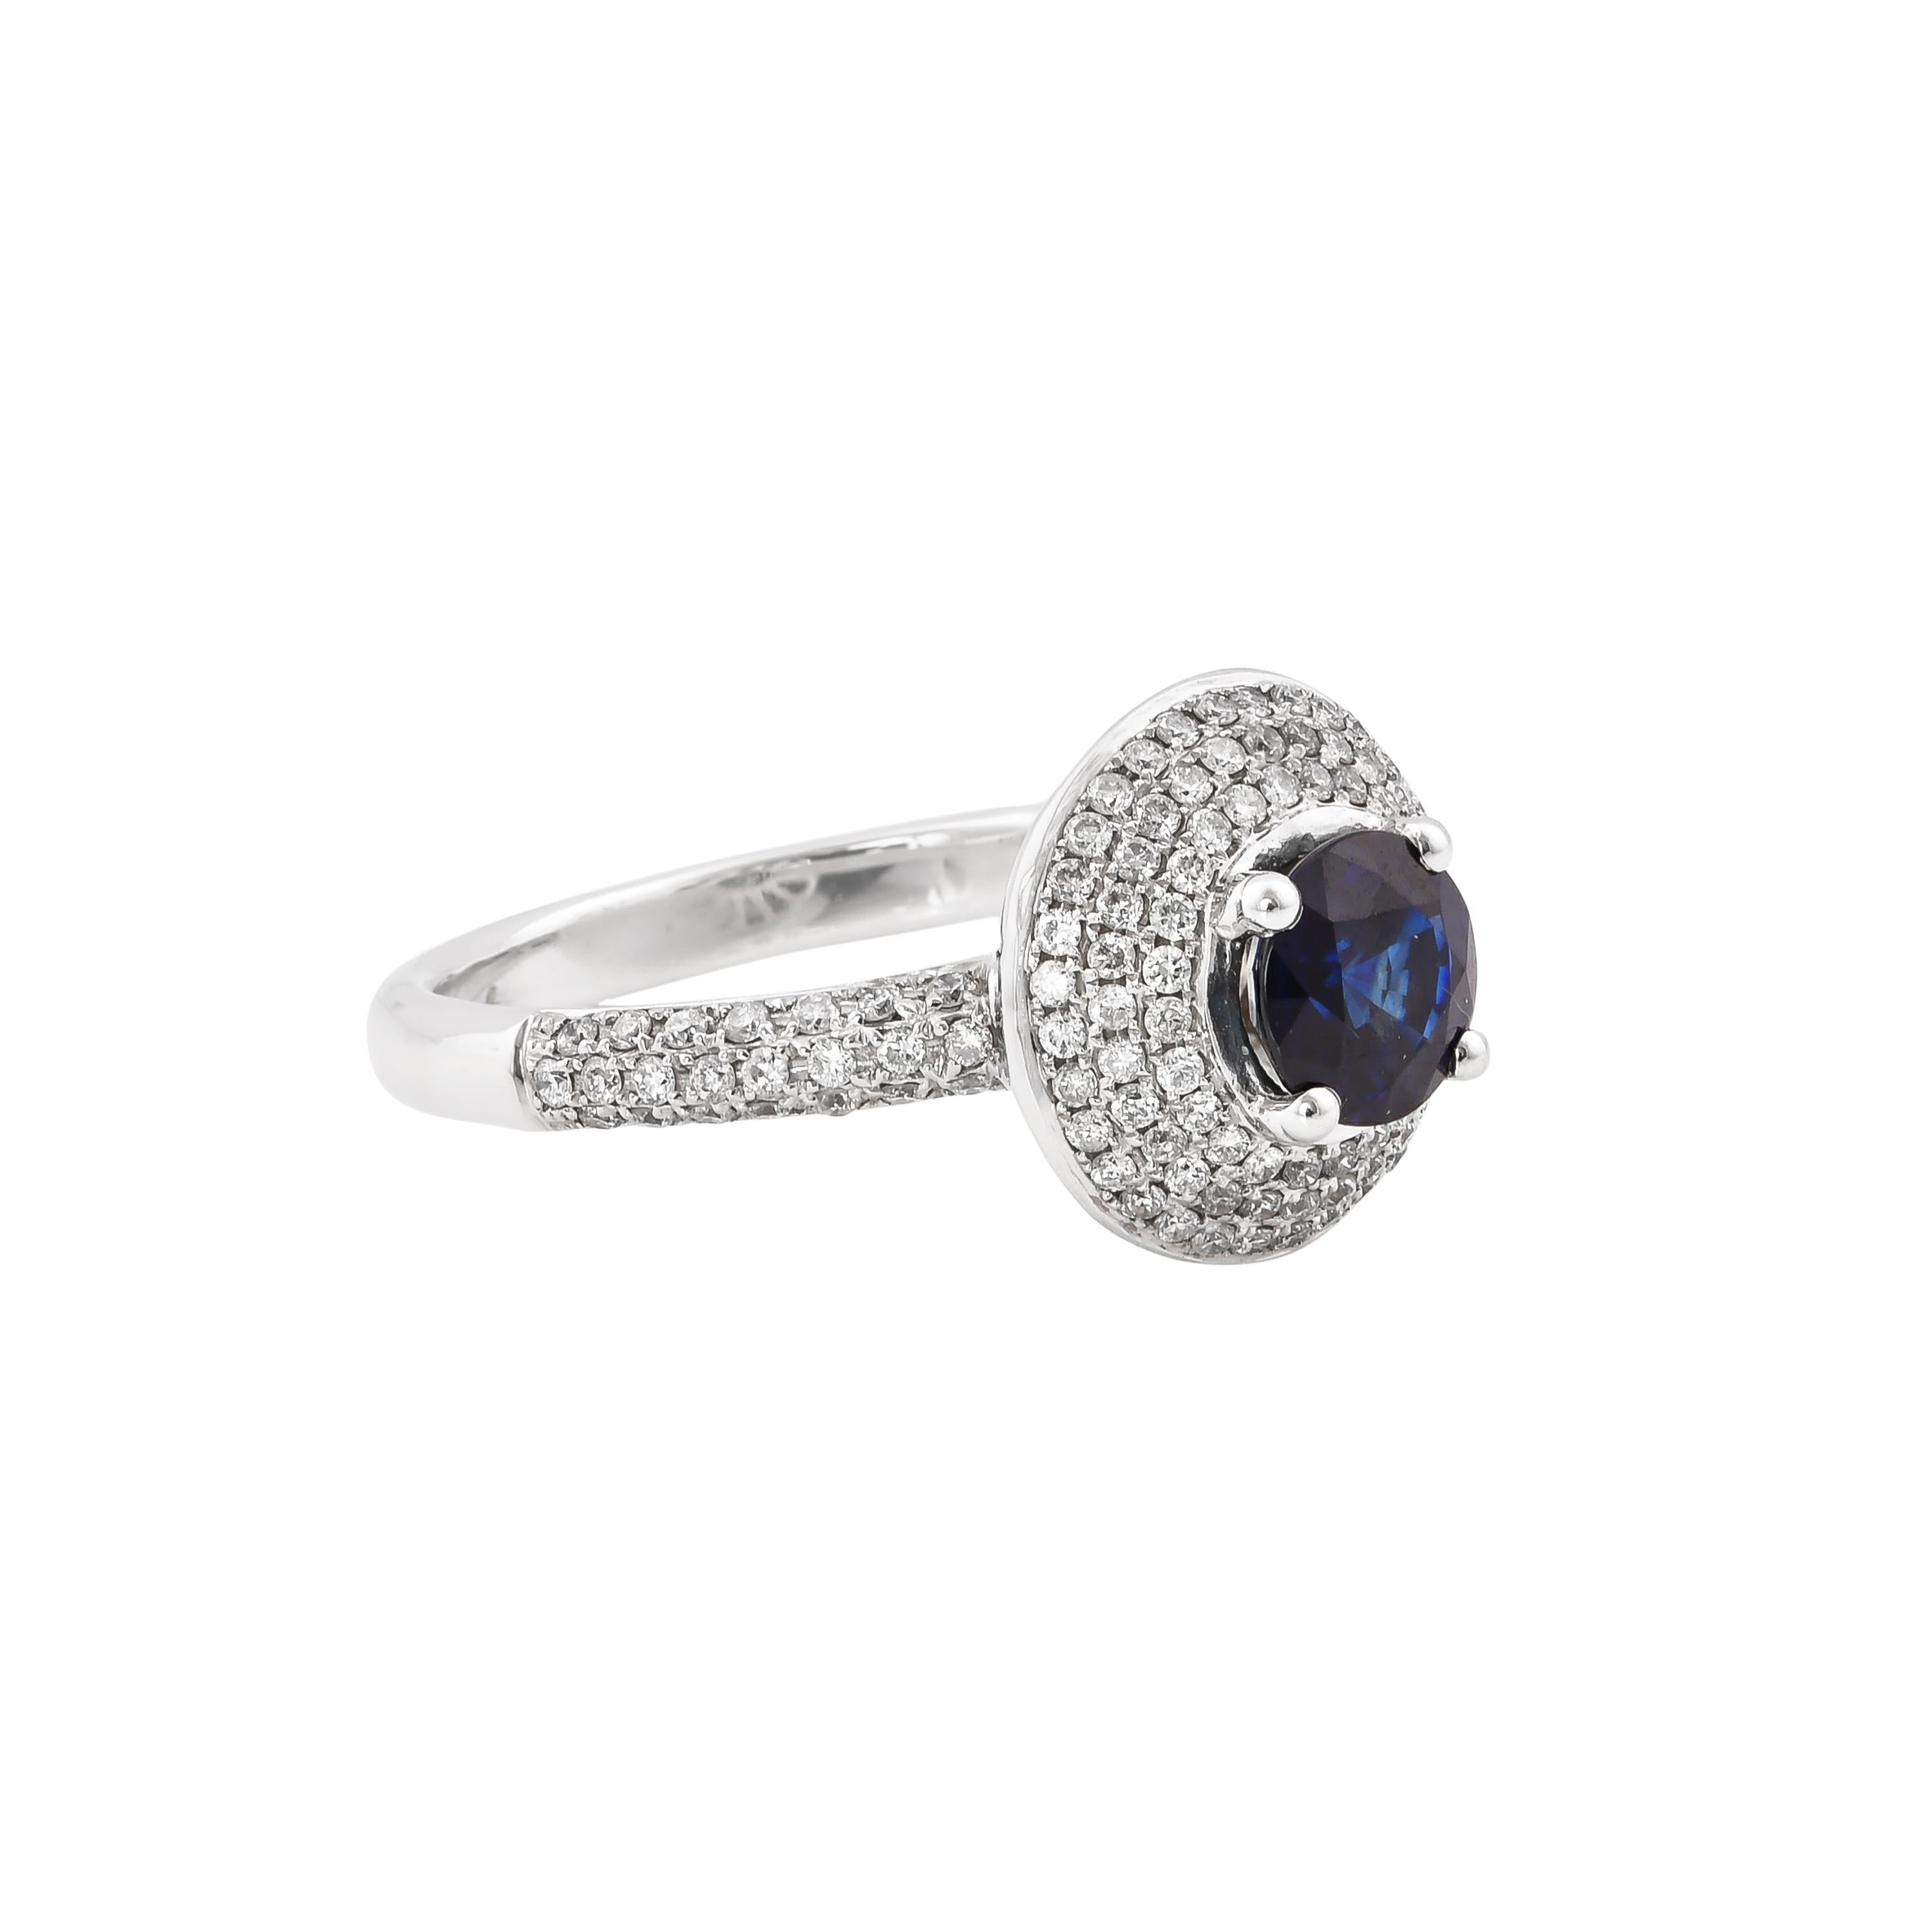 Classic rings with precious gemstones. We present a collection of everyday rings with either blue sapphire, emerald, or ruby that are accented with diamonds. These are gorgeous bridal and engagement rings to give to your loved one. 

Classic blue